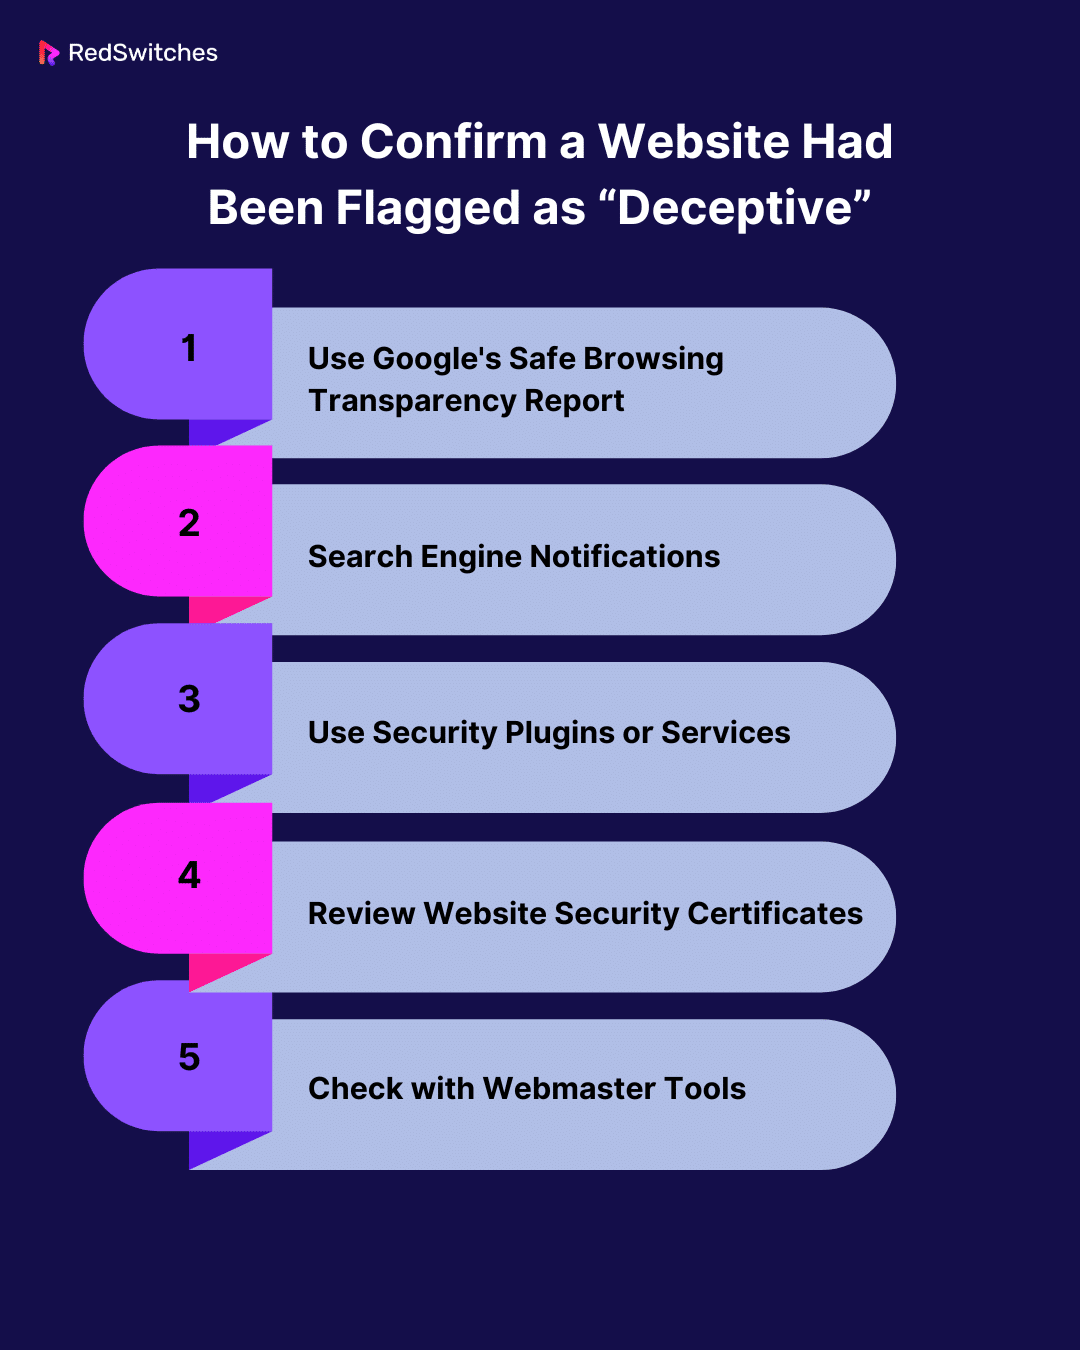 How to Confirm a Website Has Been Flagged as “Deceptive”